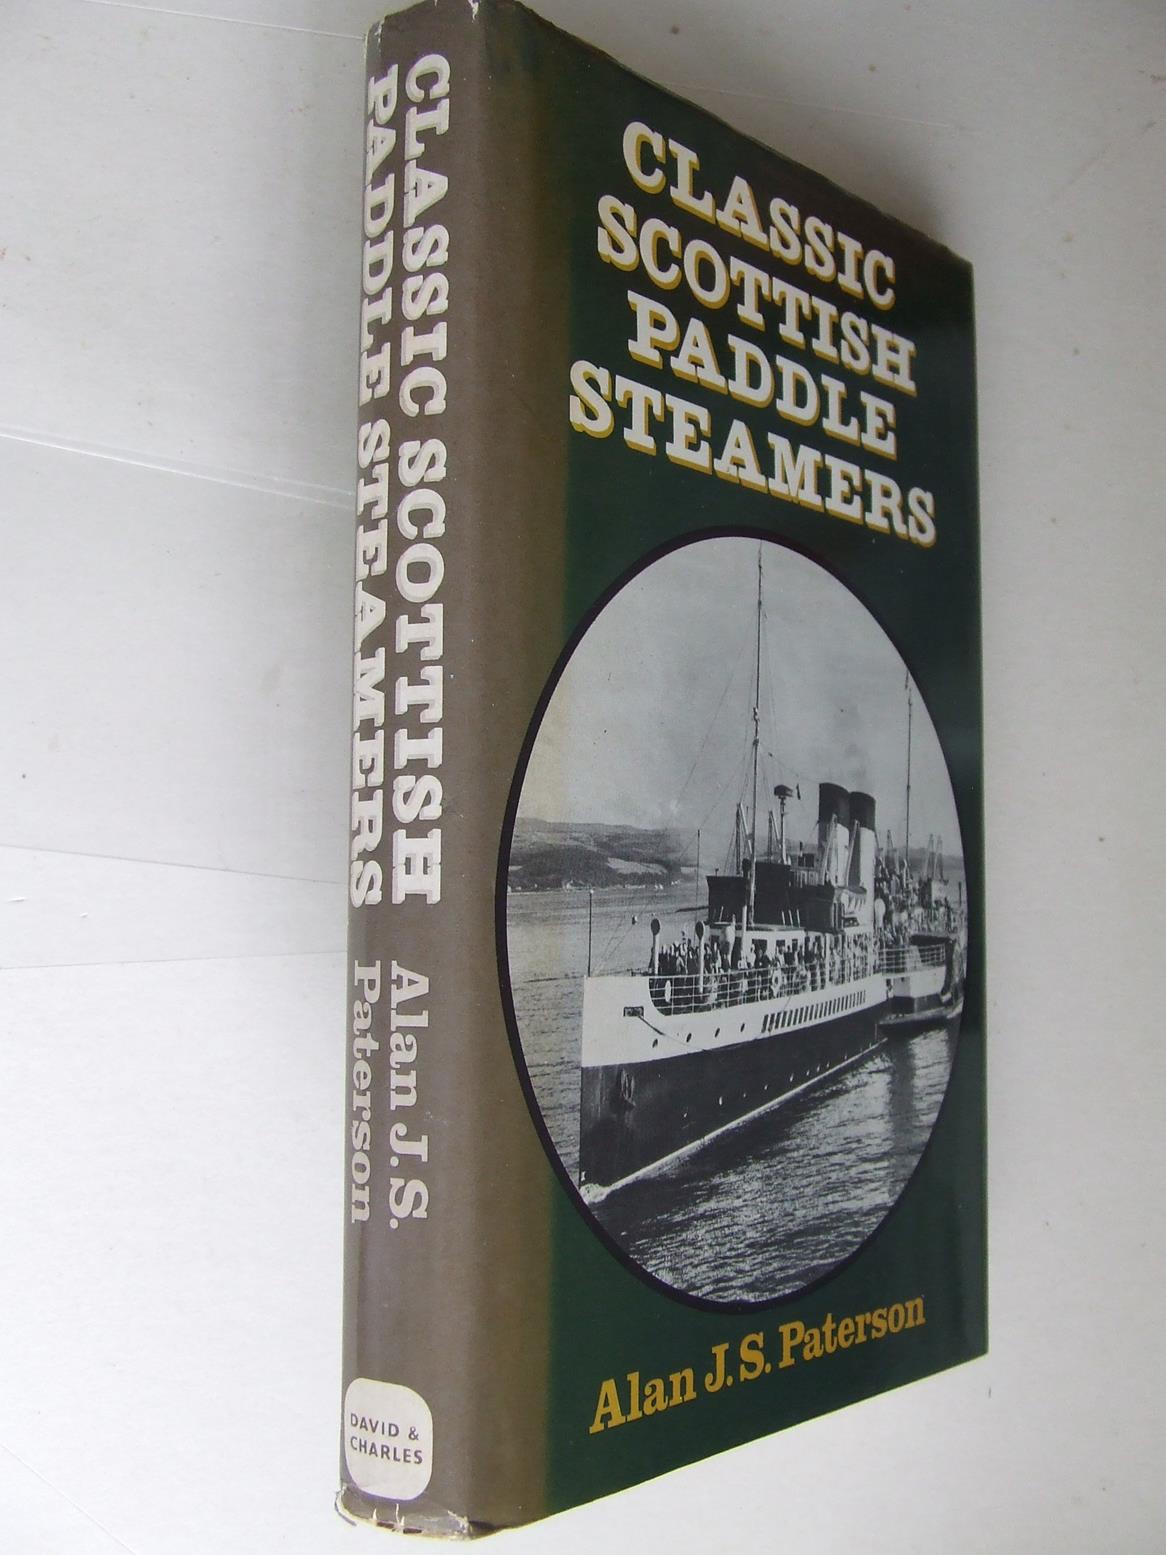 Classic Scottish Paddle Steamers